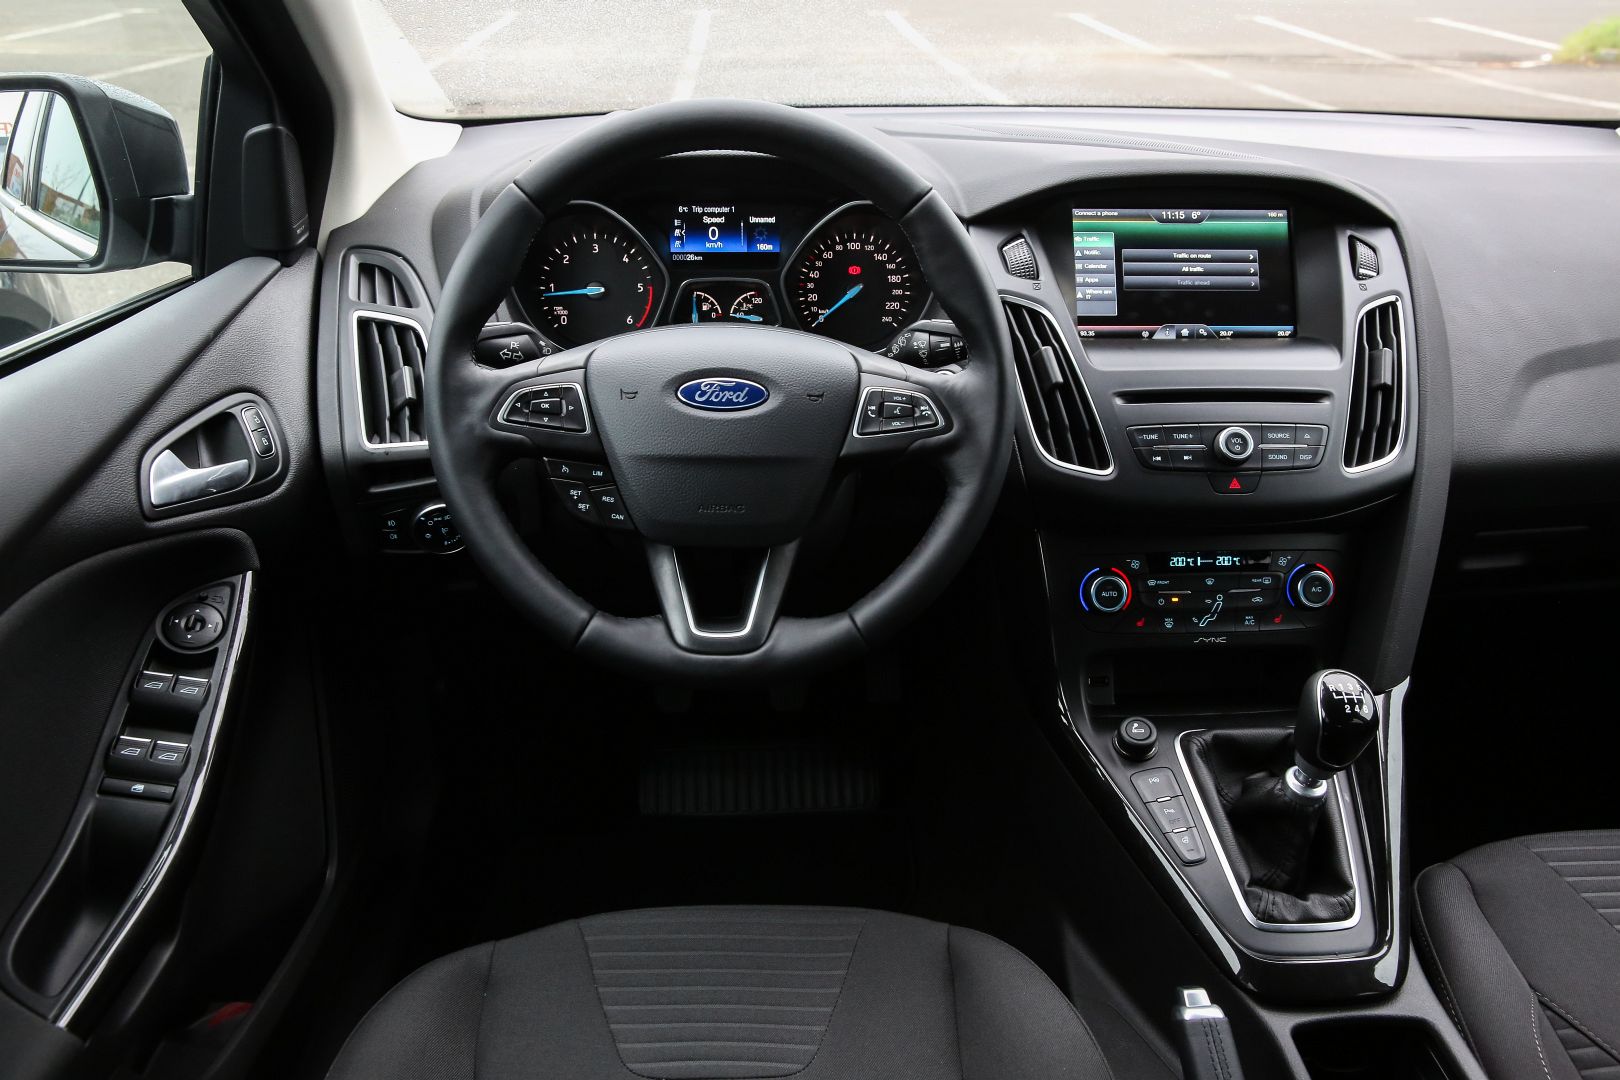 2015 FORD Focus Facelift Review - autoevolution ford crown victoria fuse diagram 